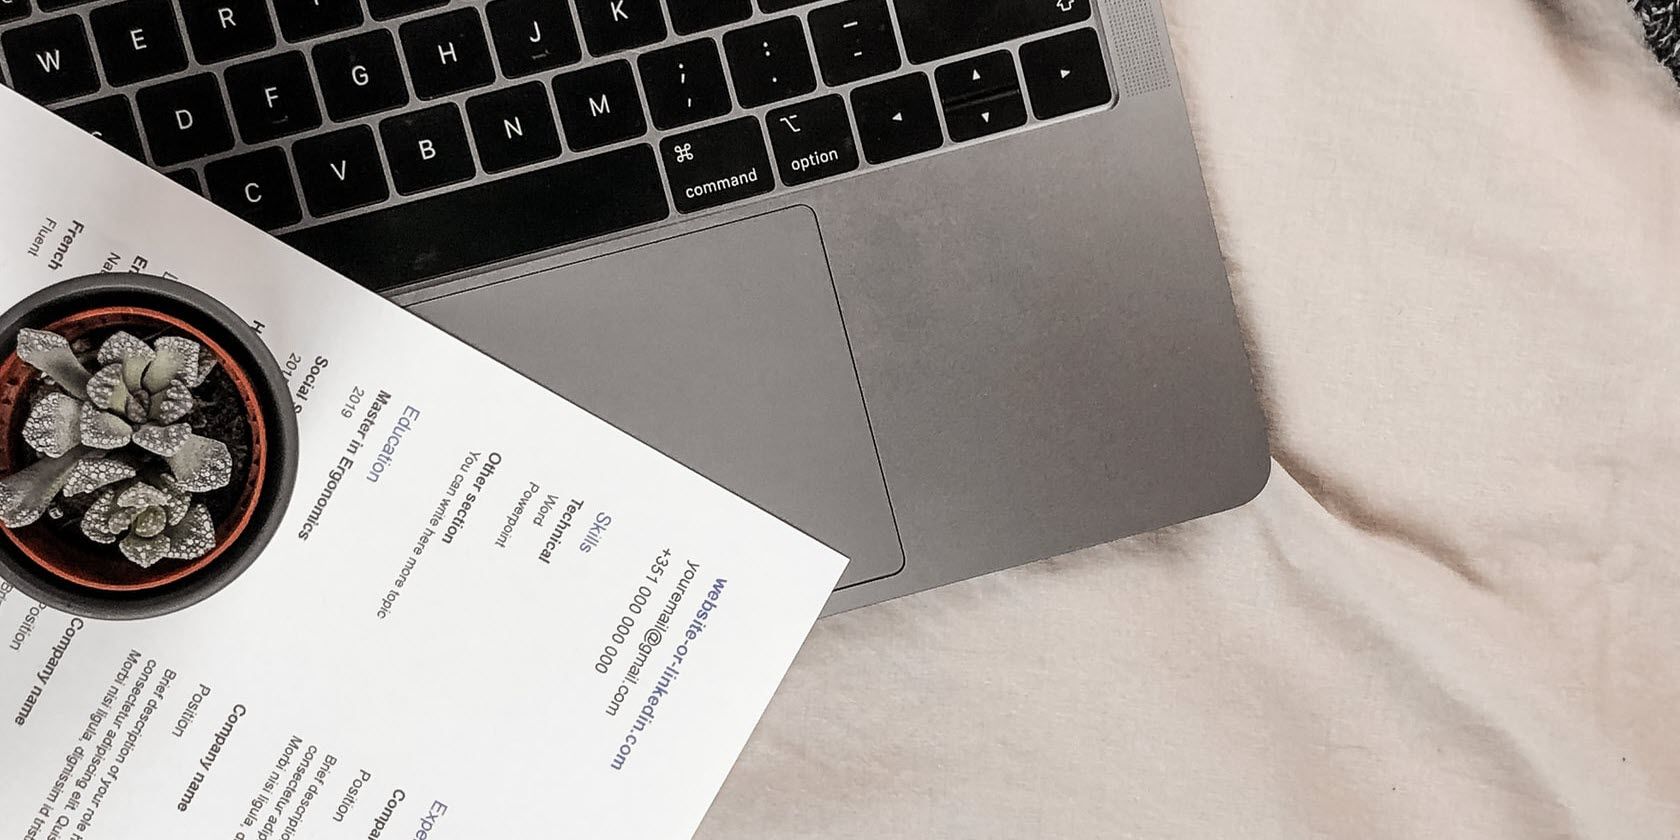 7 Microsoft Word Tips to Polish Your Old Resume